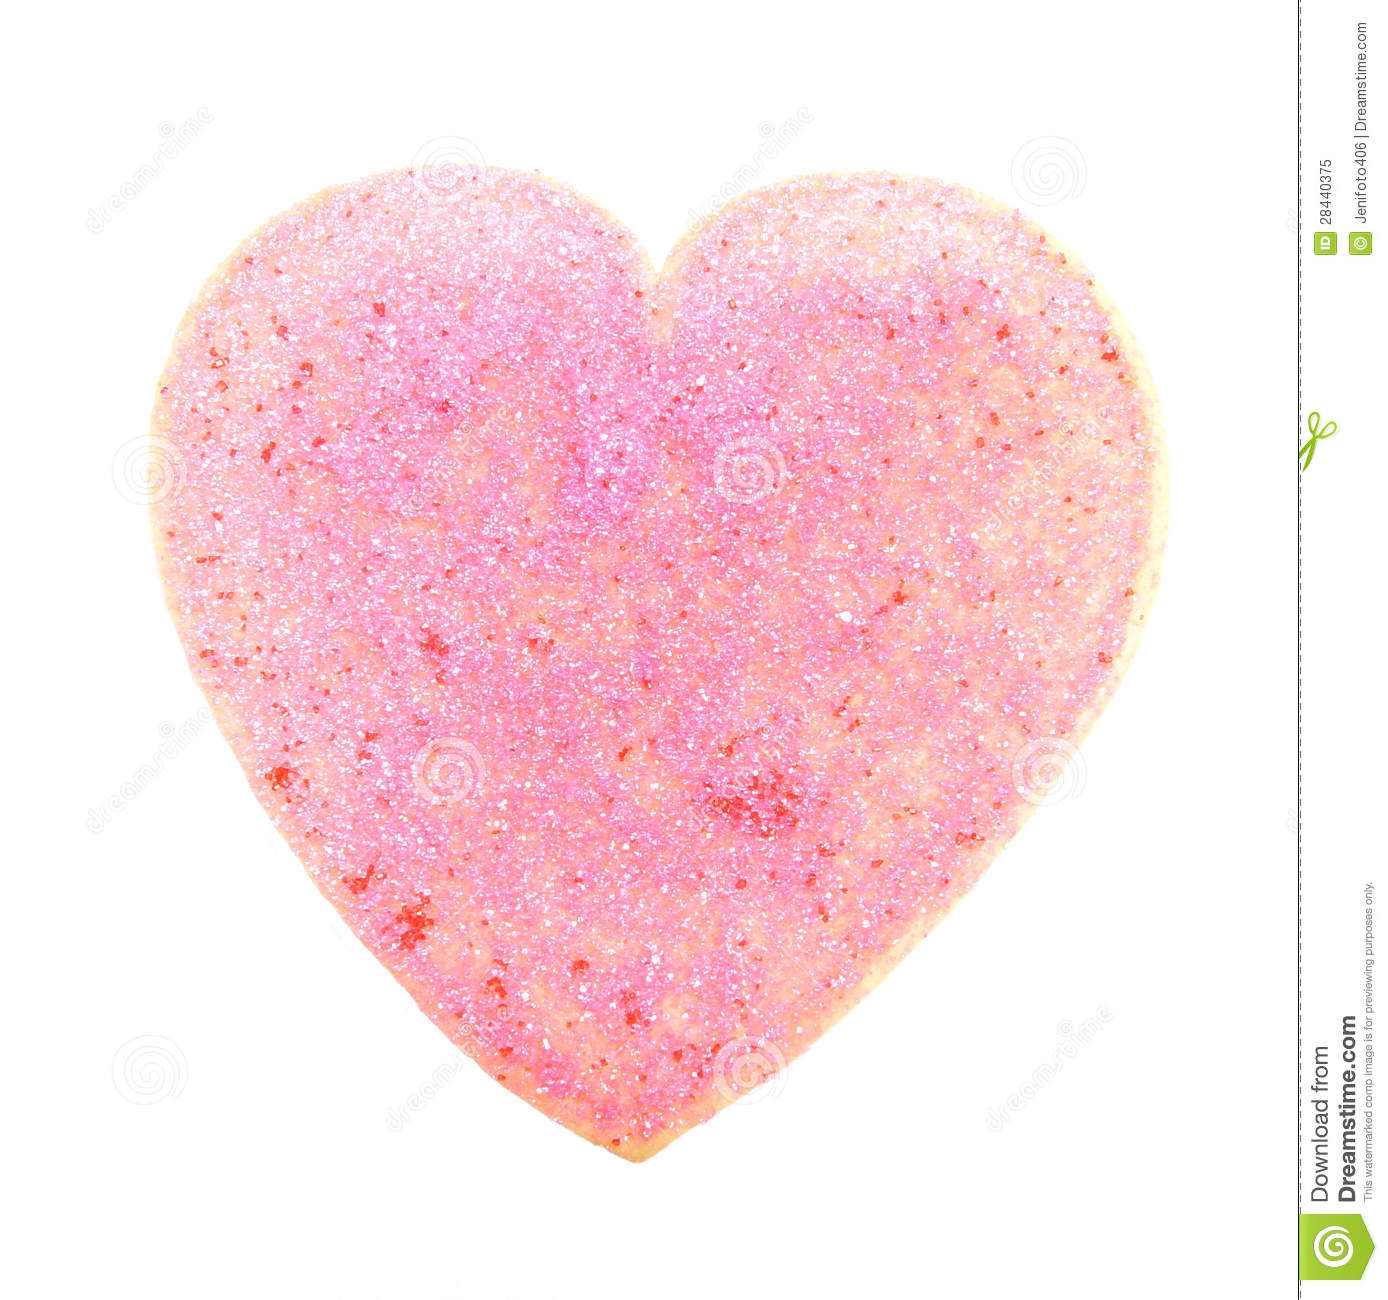 Heart Shaped Cookie Royalty Free Stock Photo   Image  28440375